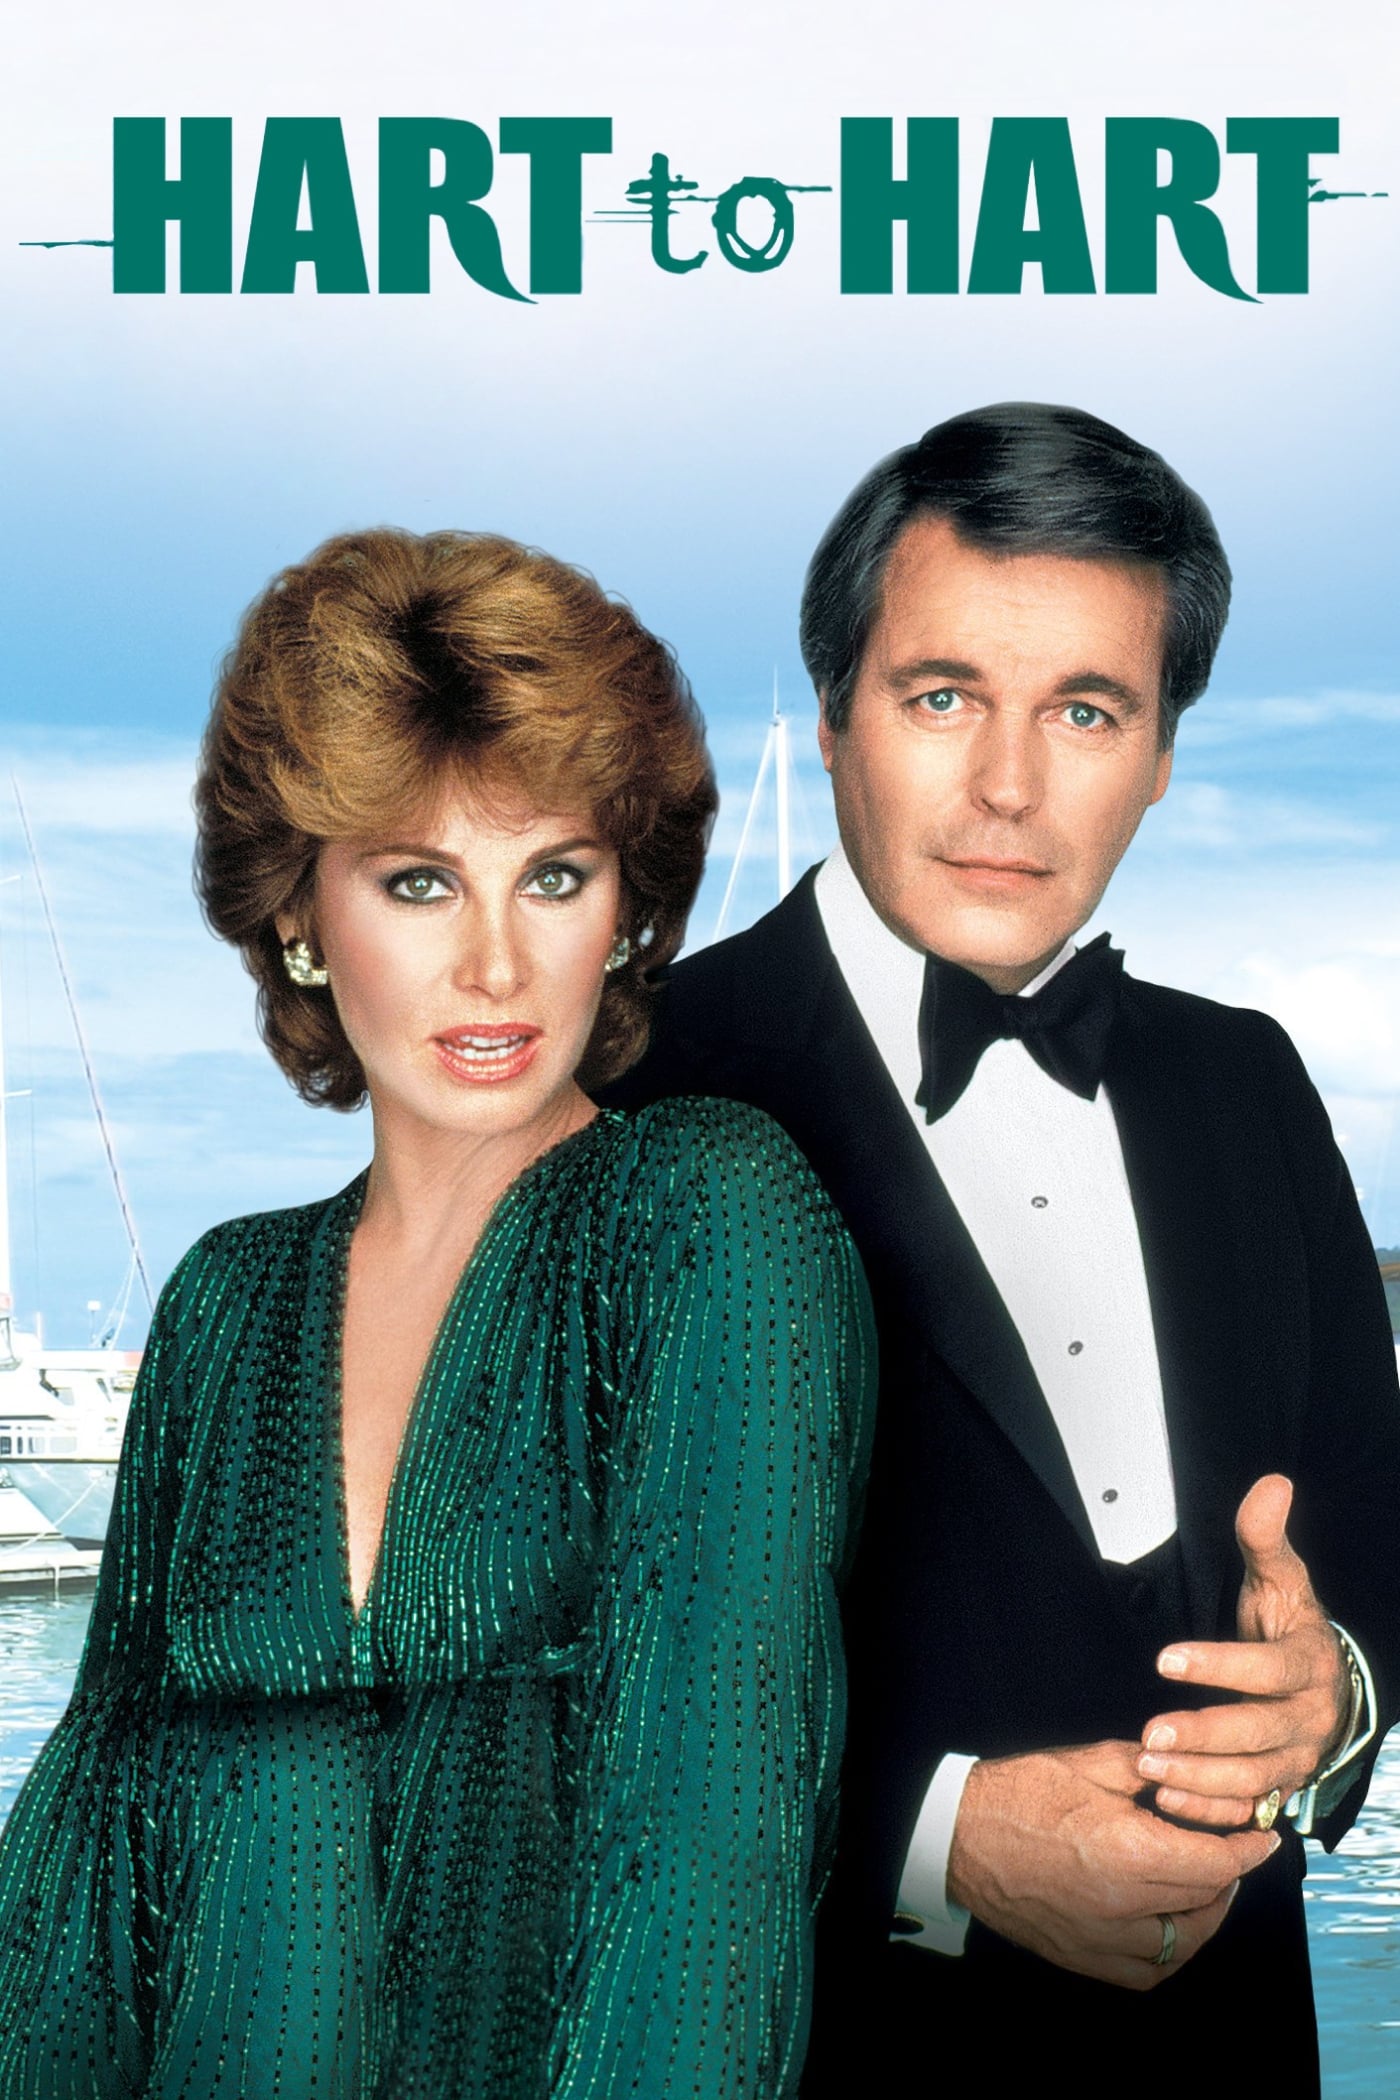 Hart to Hart TV Shows About Husband Wife Relationship